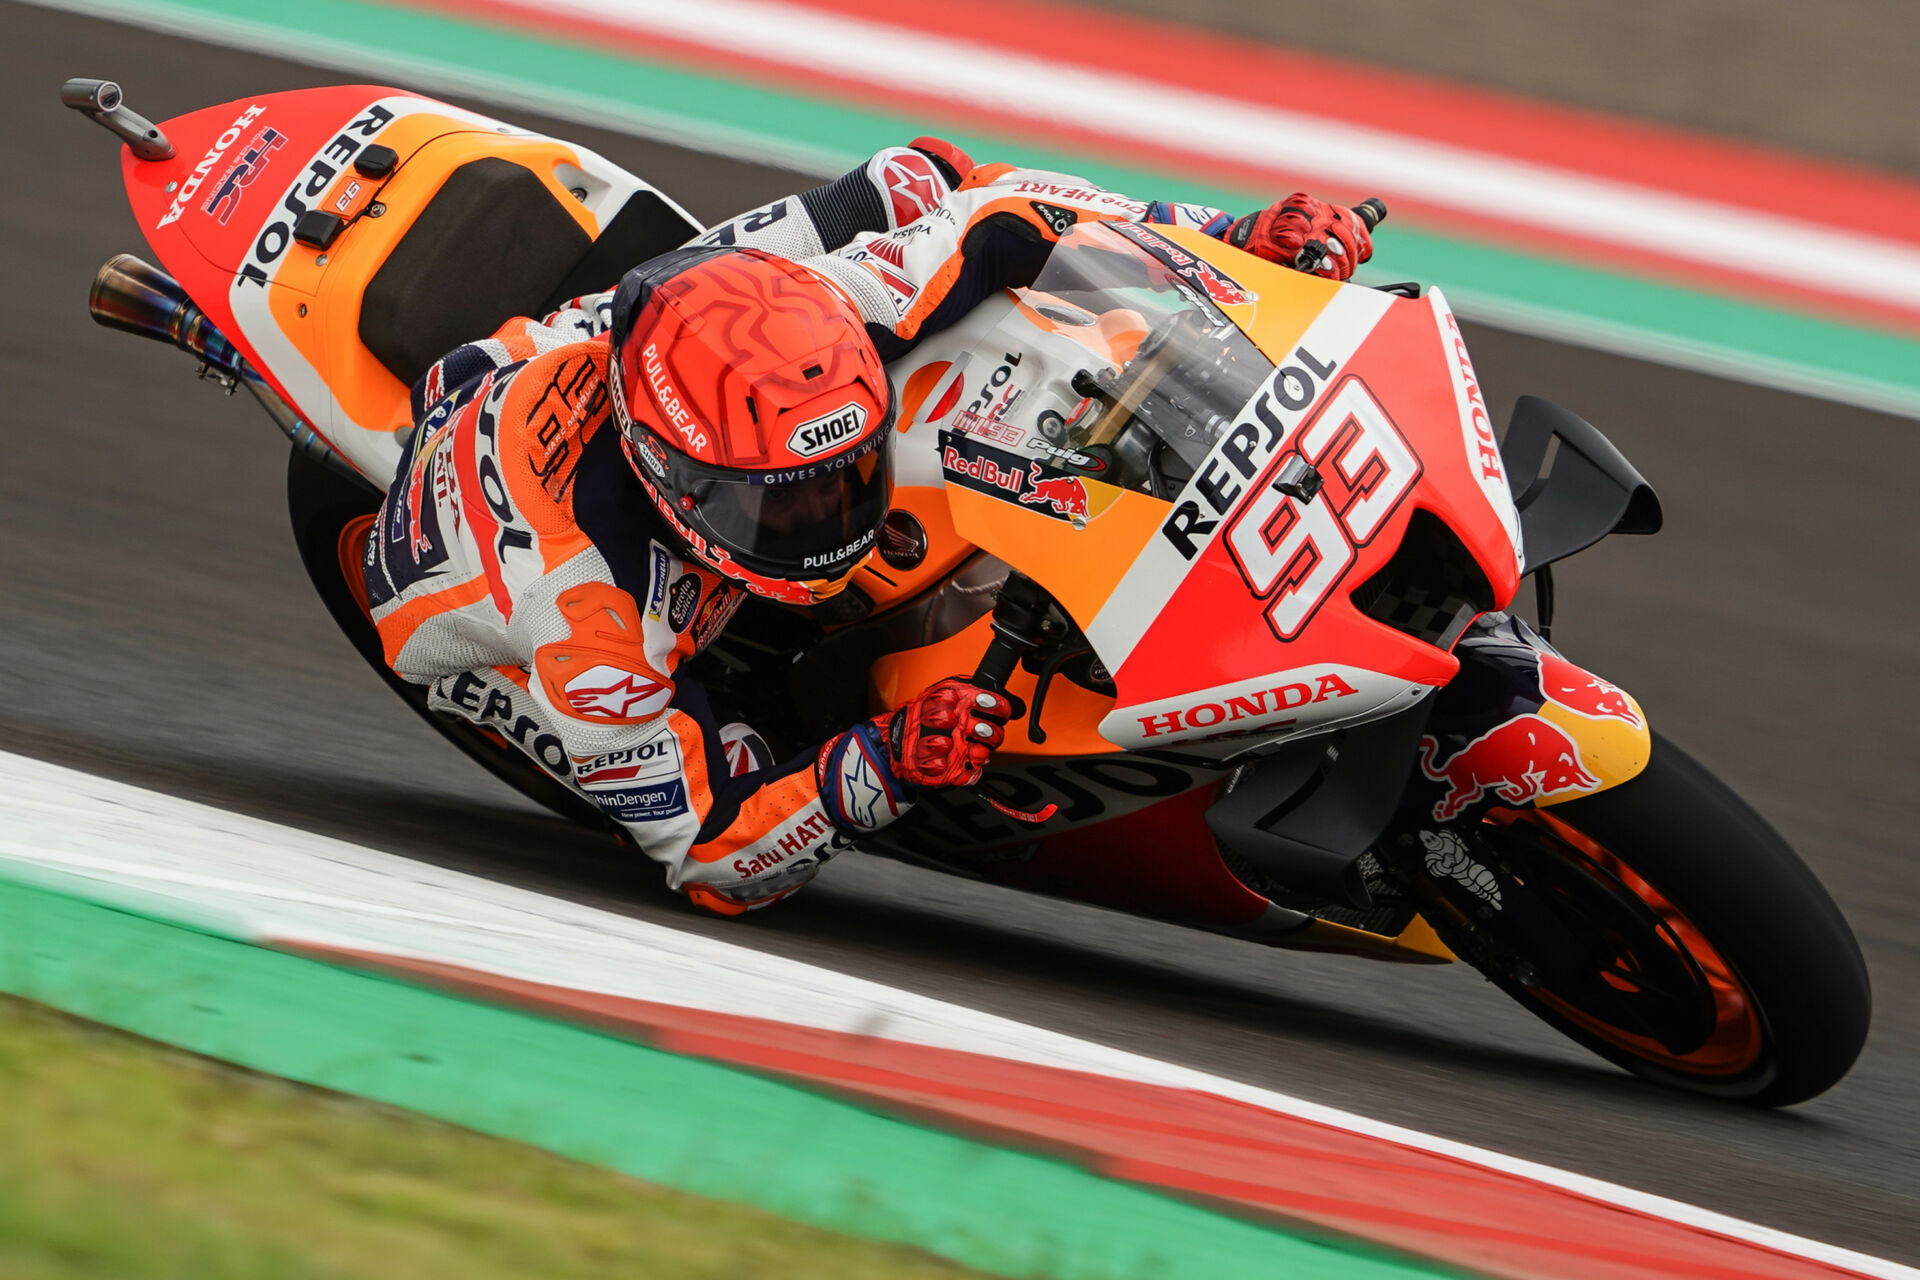 MotoGP: Marc Marquez Says Time To Get Back To Work - Roadracing World  Magazine